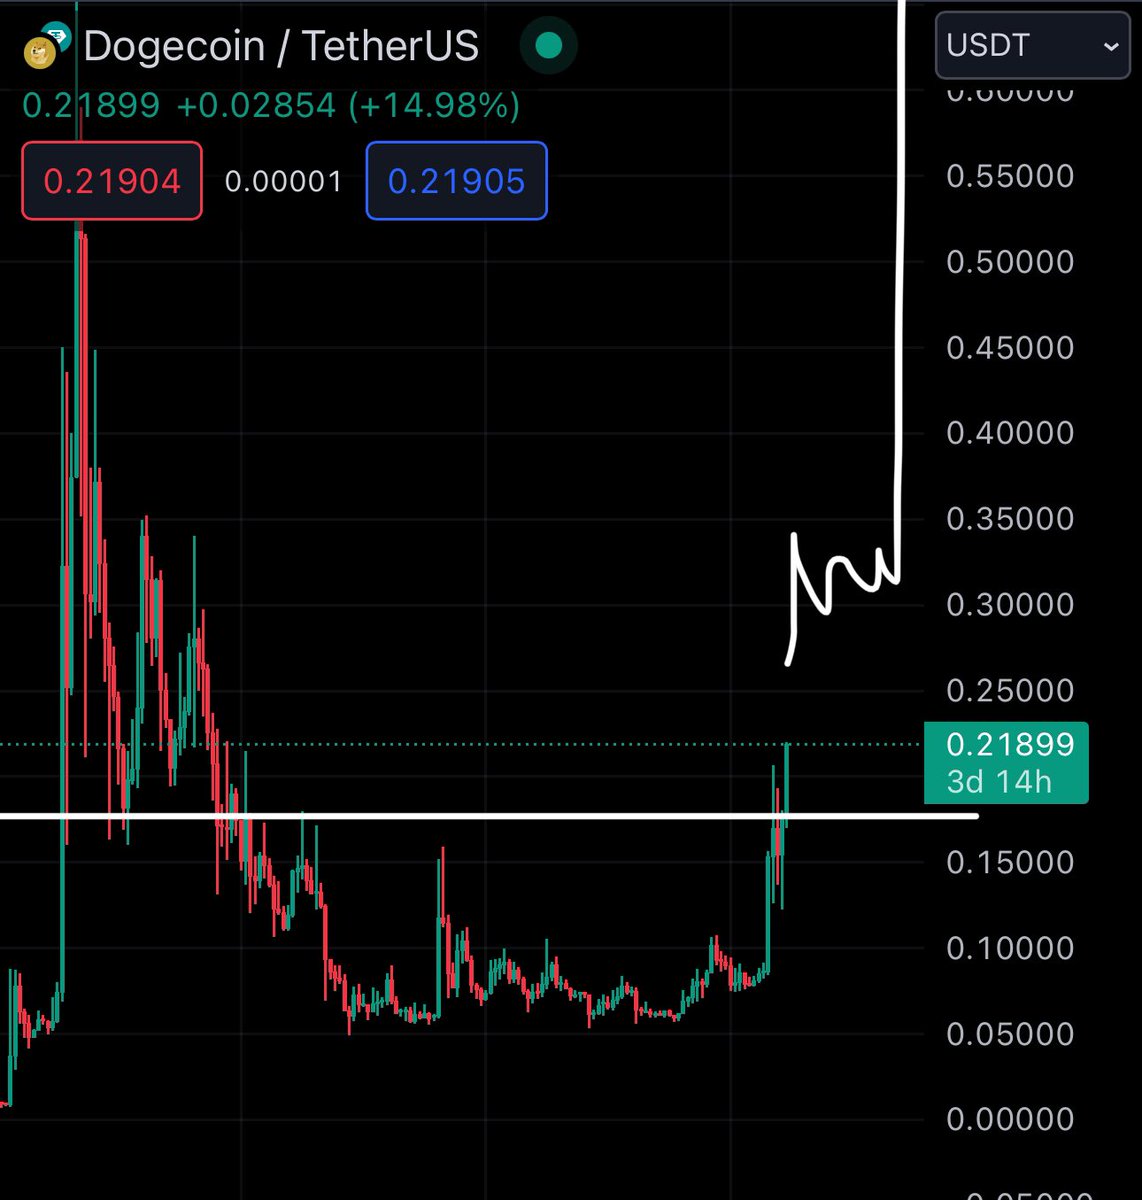 $DOGE breakout, $1 for this cycle is inevitable. 👊 I continue to bet on the #DRC20 who bring more utility and inscription to #Dogecoin $HUB $DBIT $DOGI when @okxweb3 will be live for #DOGINALS the second wave will start, and will not wait for you 🙂